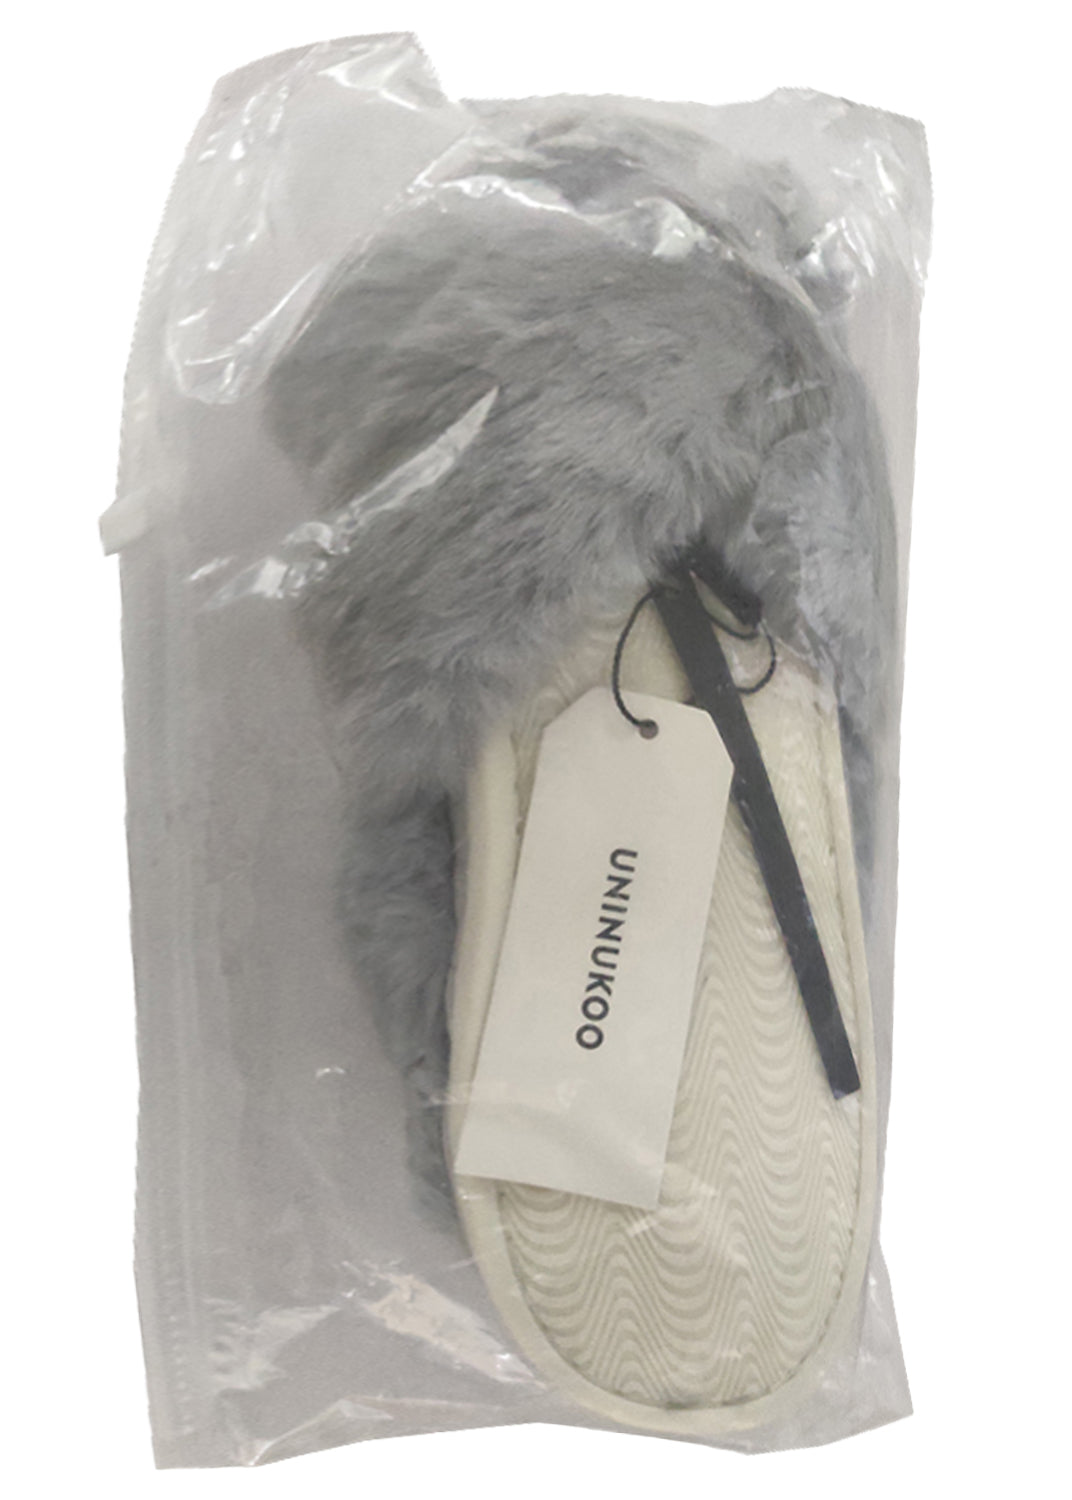 Womens Winter Slippers Indoor Warm Cotton Faux Fur Slippers Size 5-10